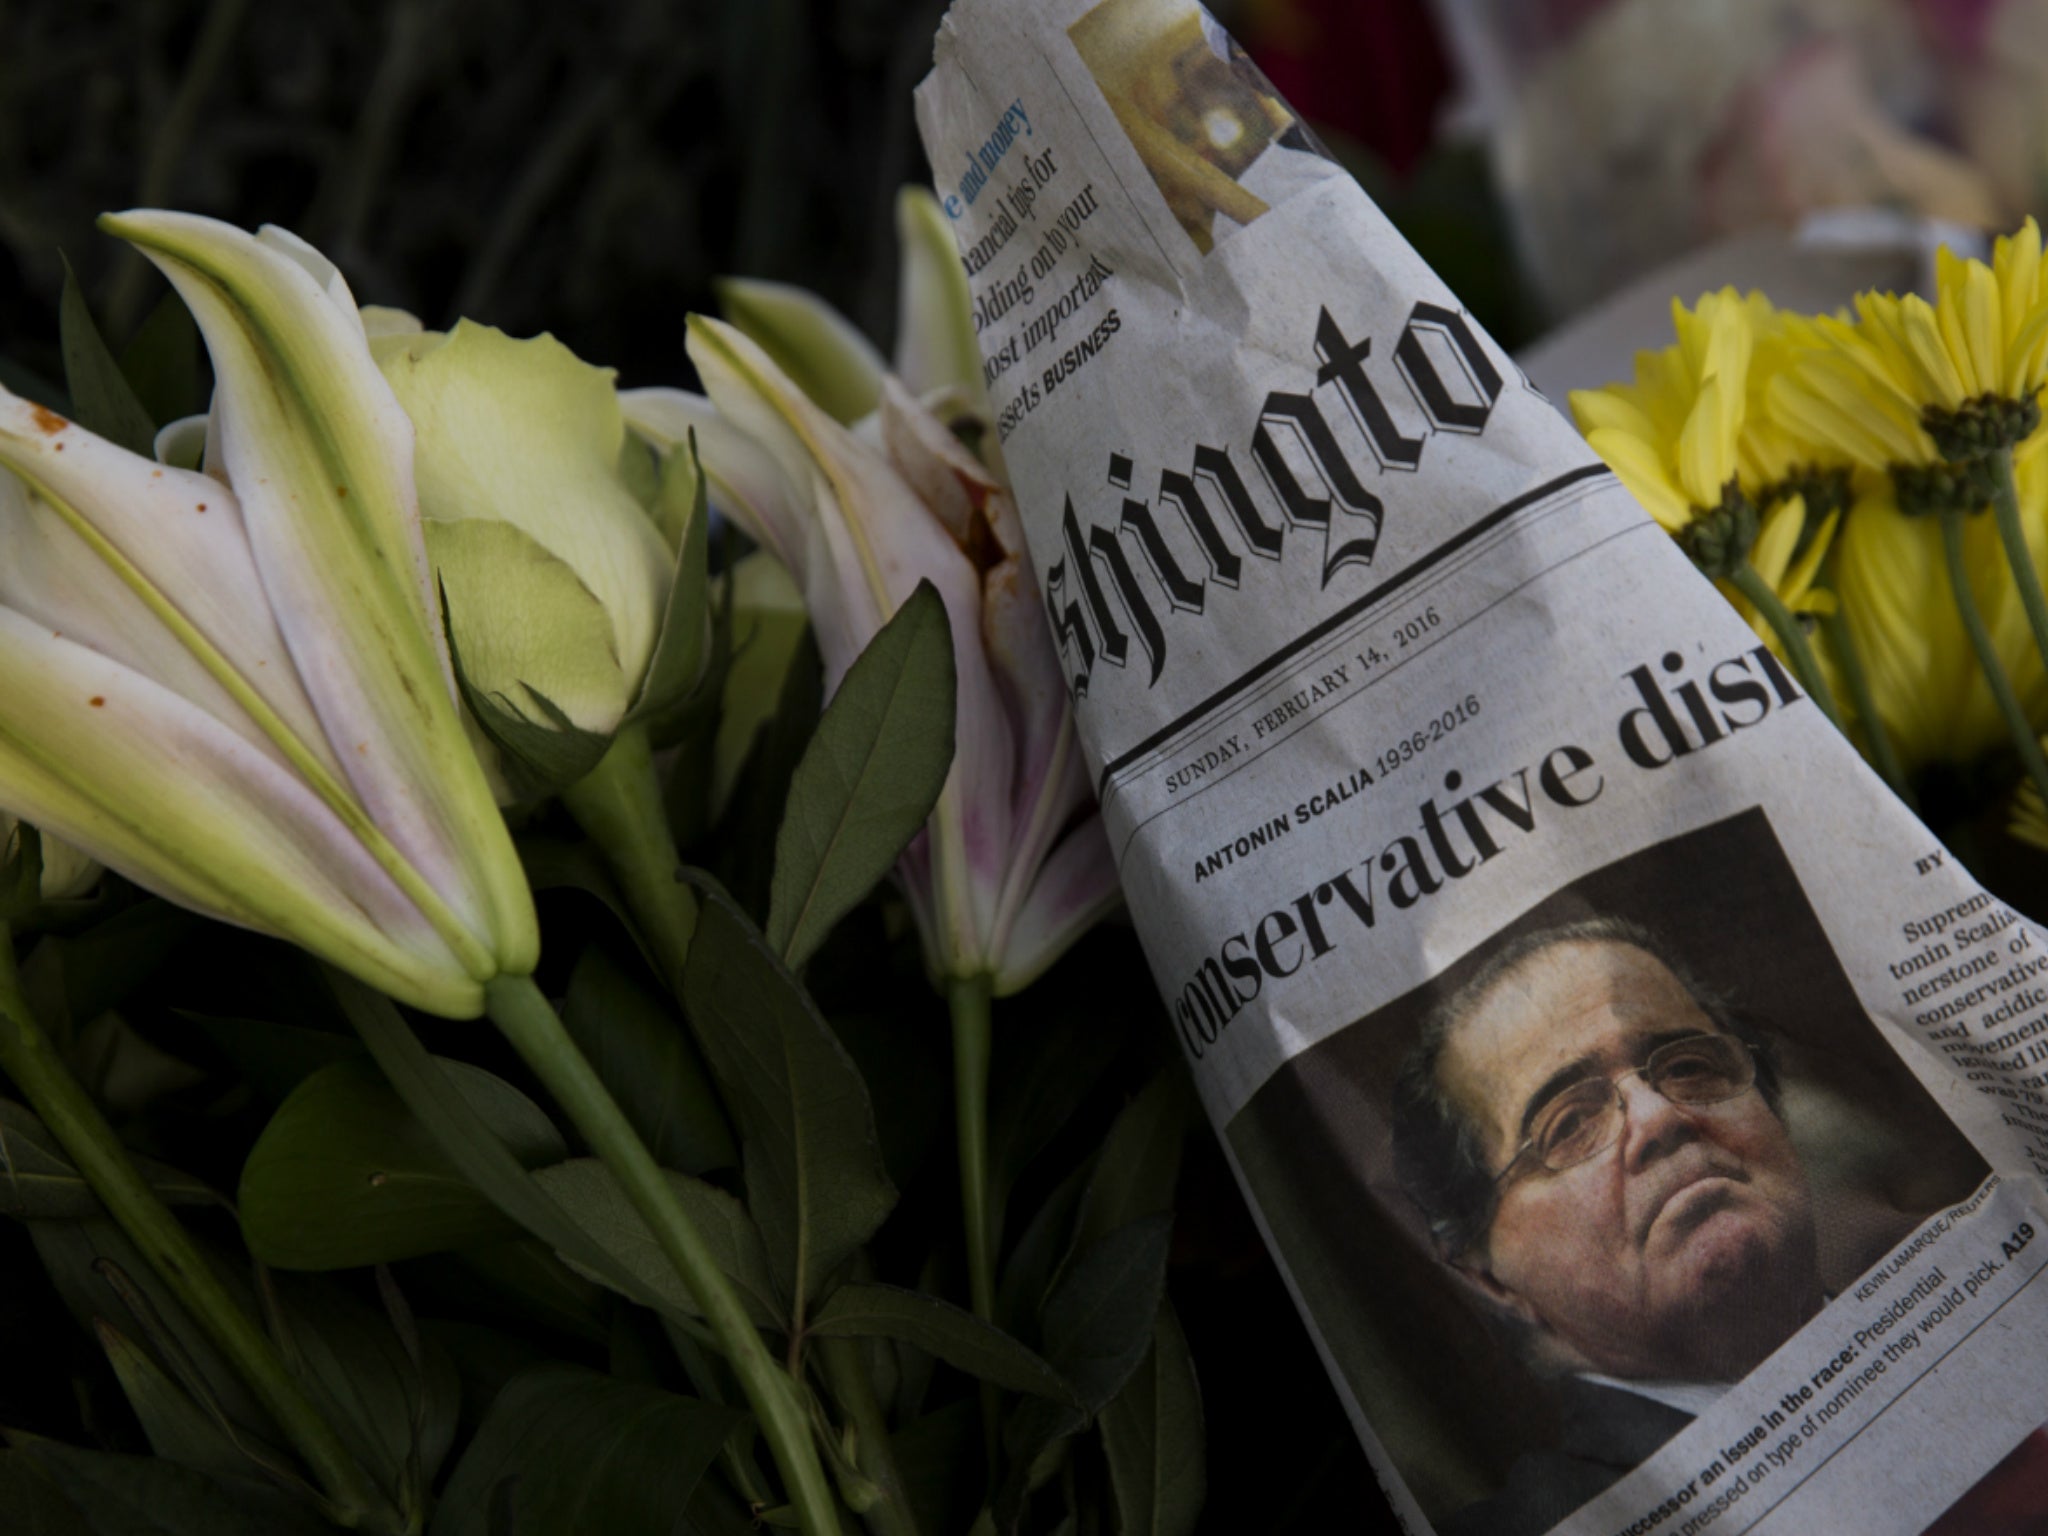 A makeshift memorial for Supreme Court Justice Antonin Scalia is seen at the U.S. Supreme Court, February 14, 2016 in Washington, DC